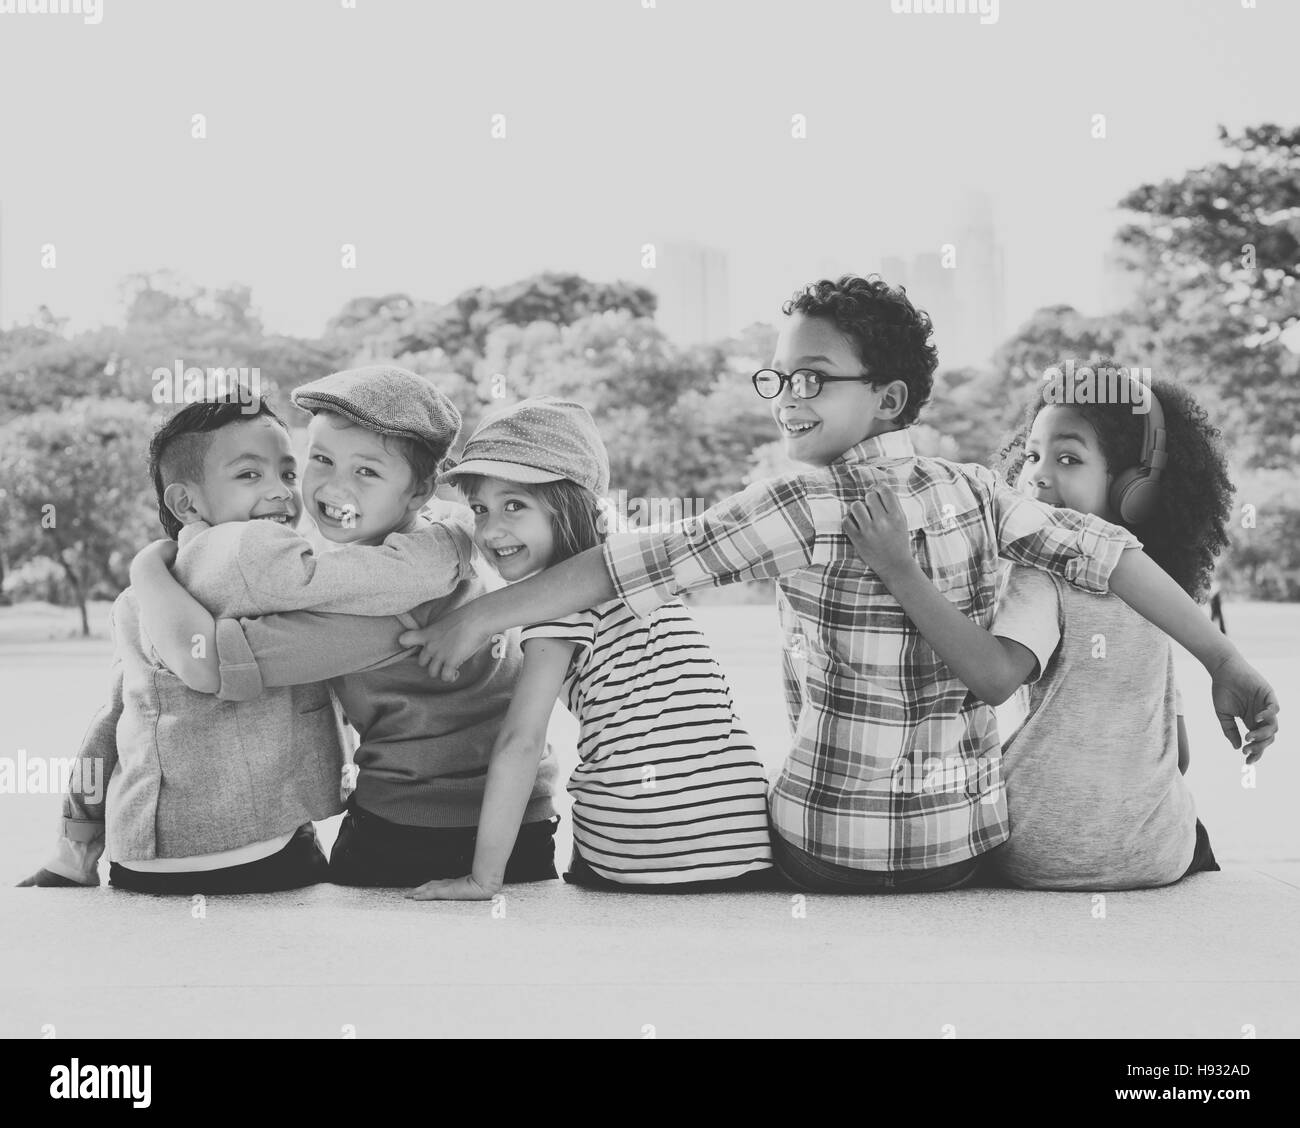 Kids Fun Children Playful Happiness Retro Togetherness Concept Stock Photo